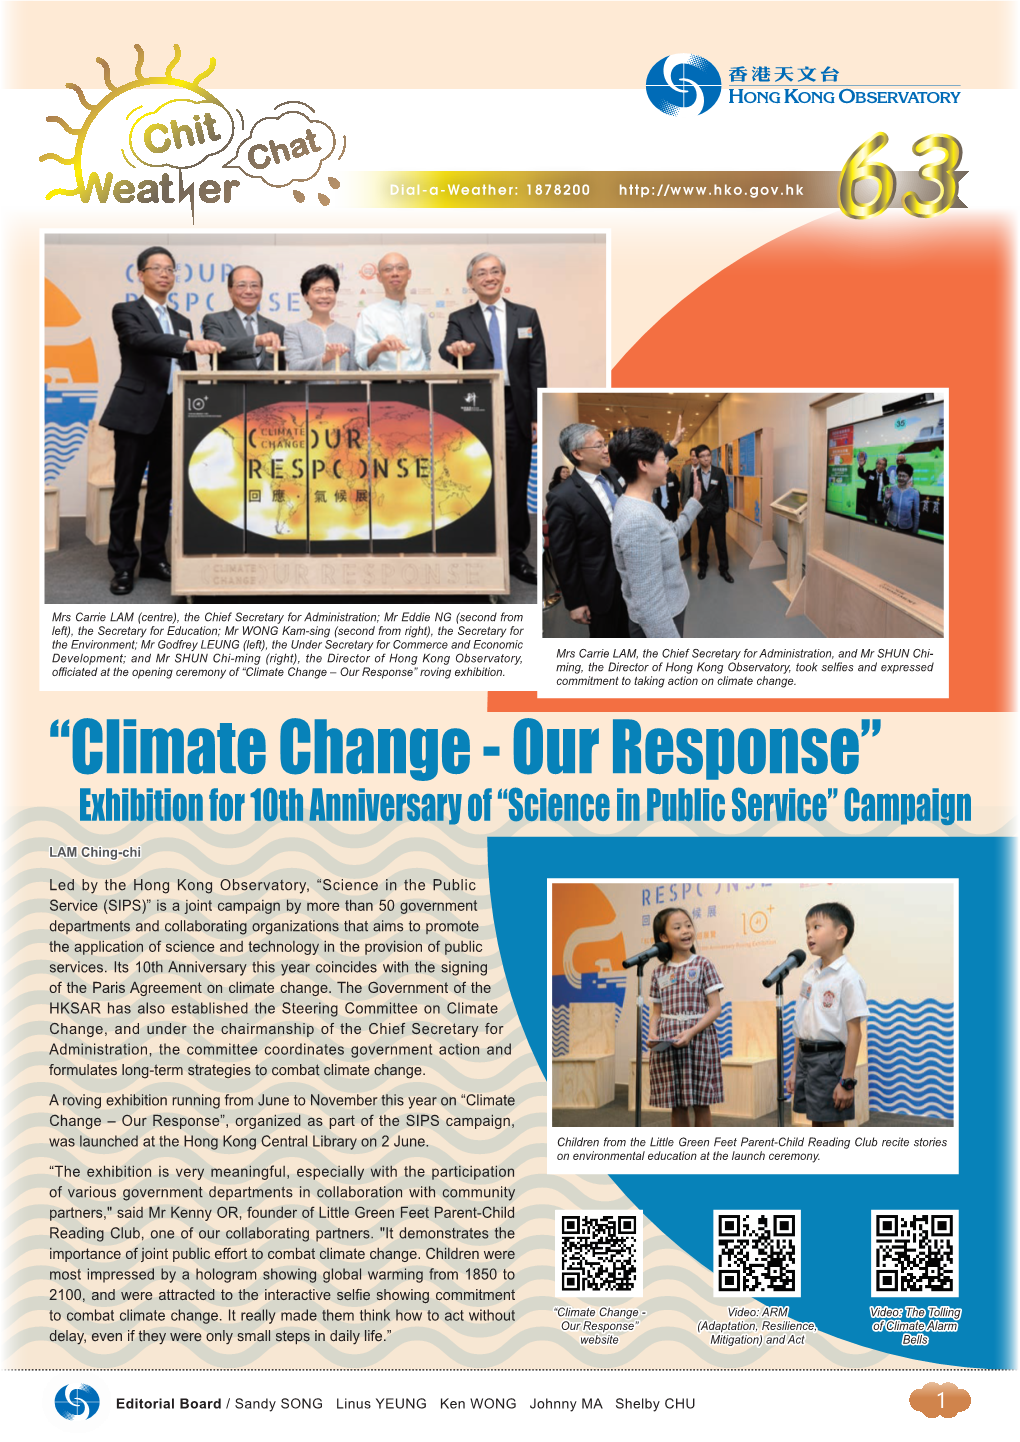 “Climate Change – Our Response” Roving Exhibition